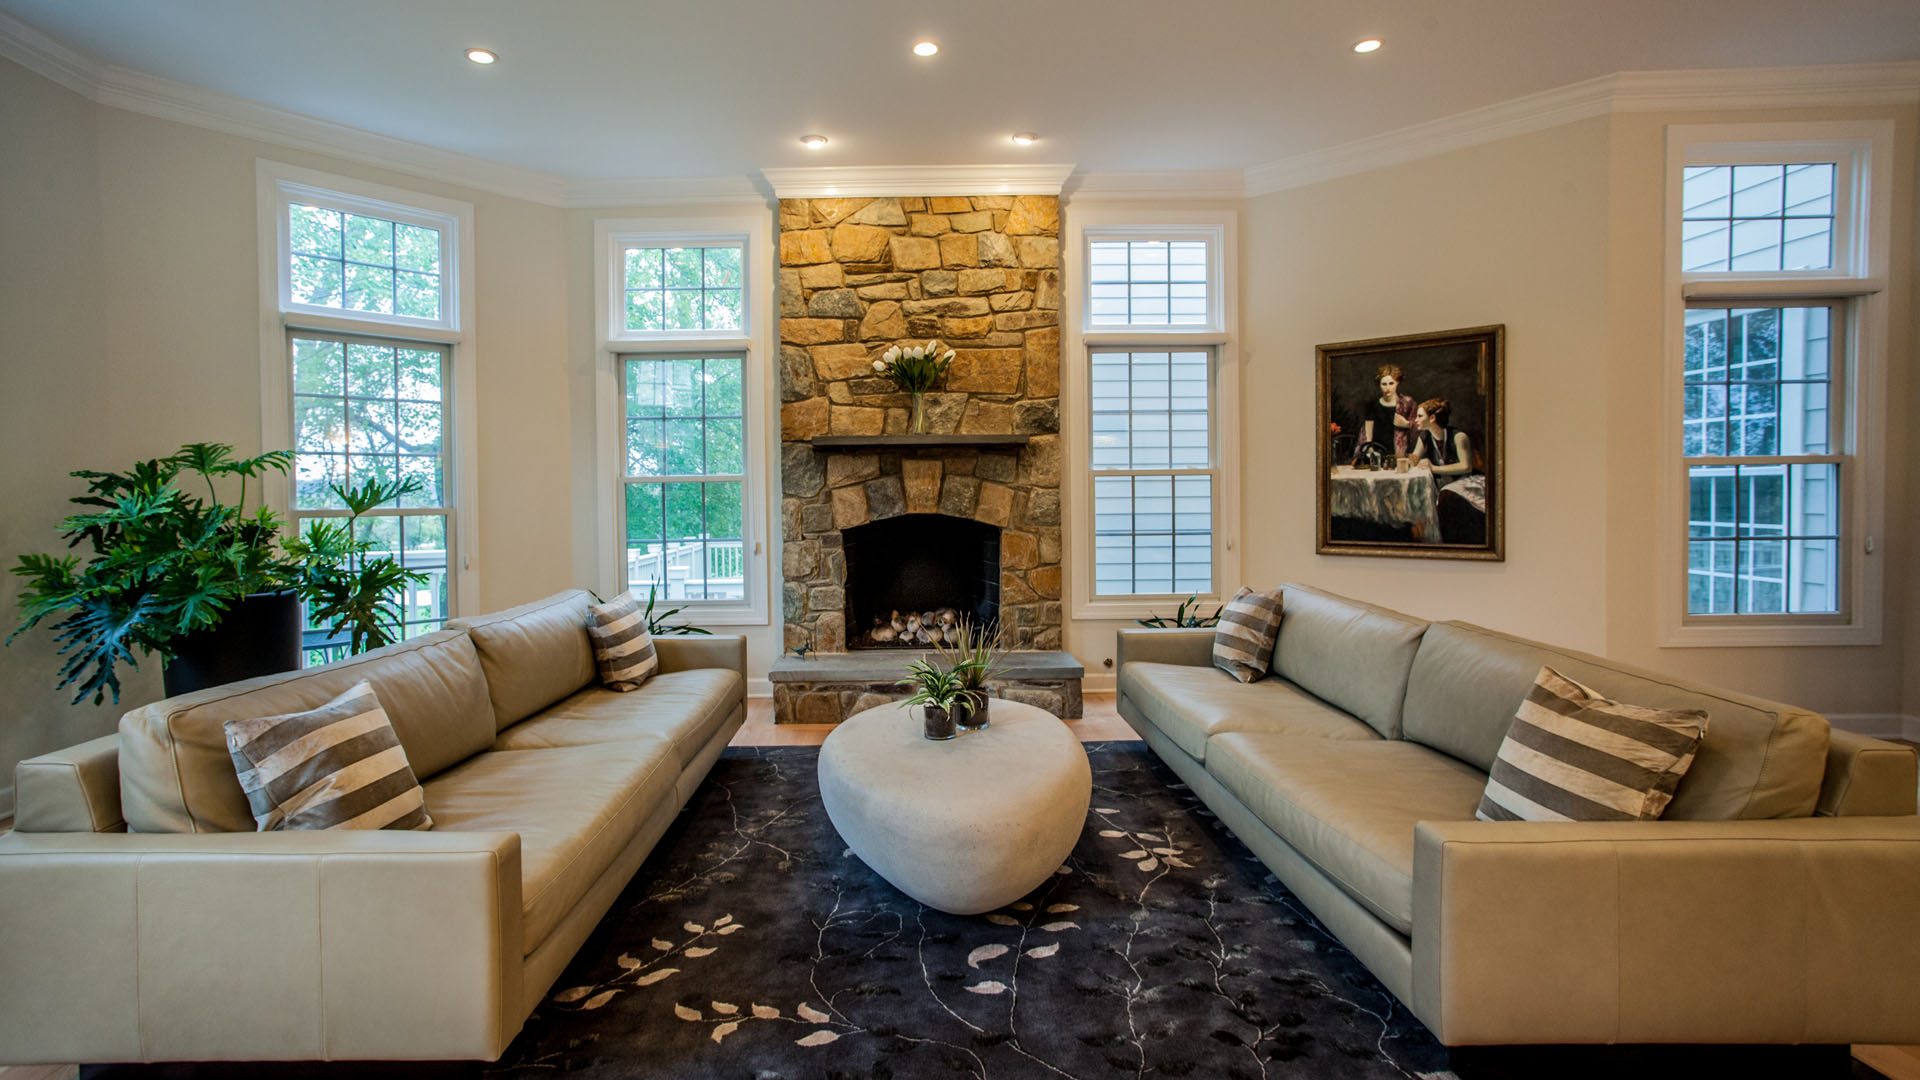 2014 NAHB, Best of American Living Awards (BALA) Silver Award Winner, Entire Home Remodel up to $250,000